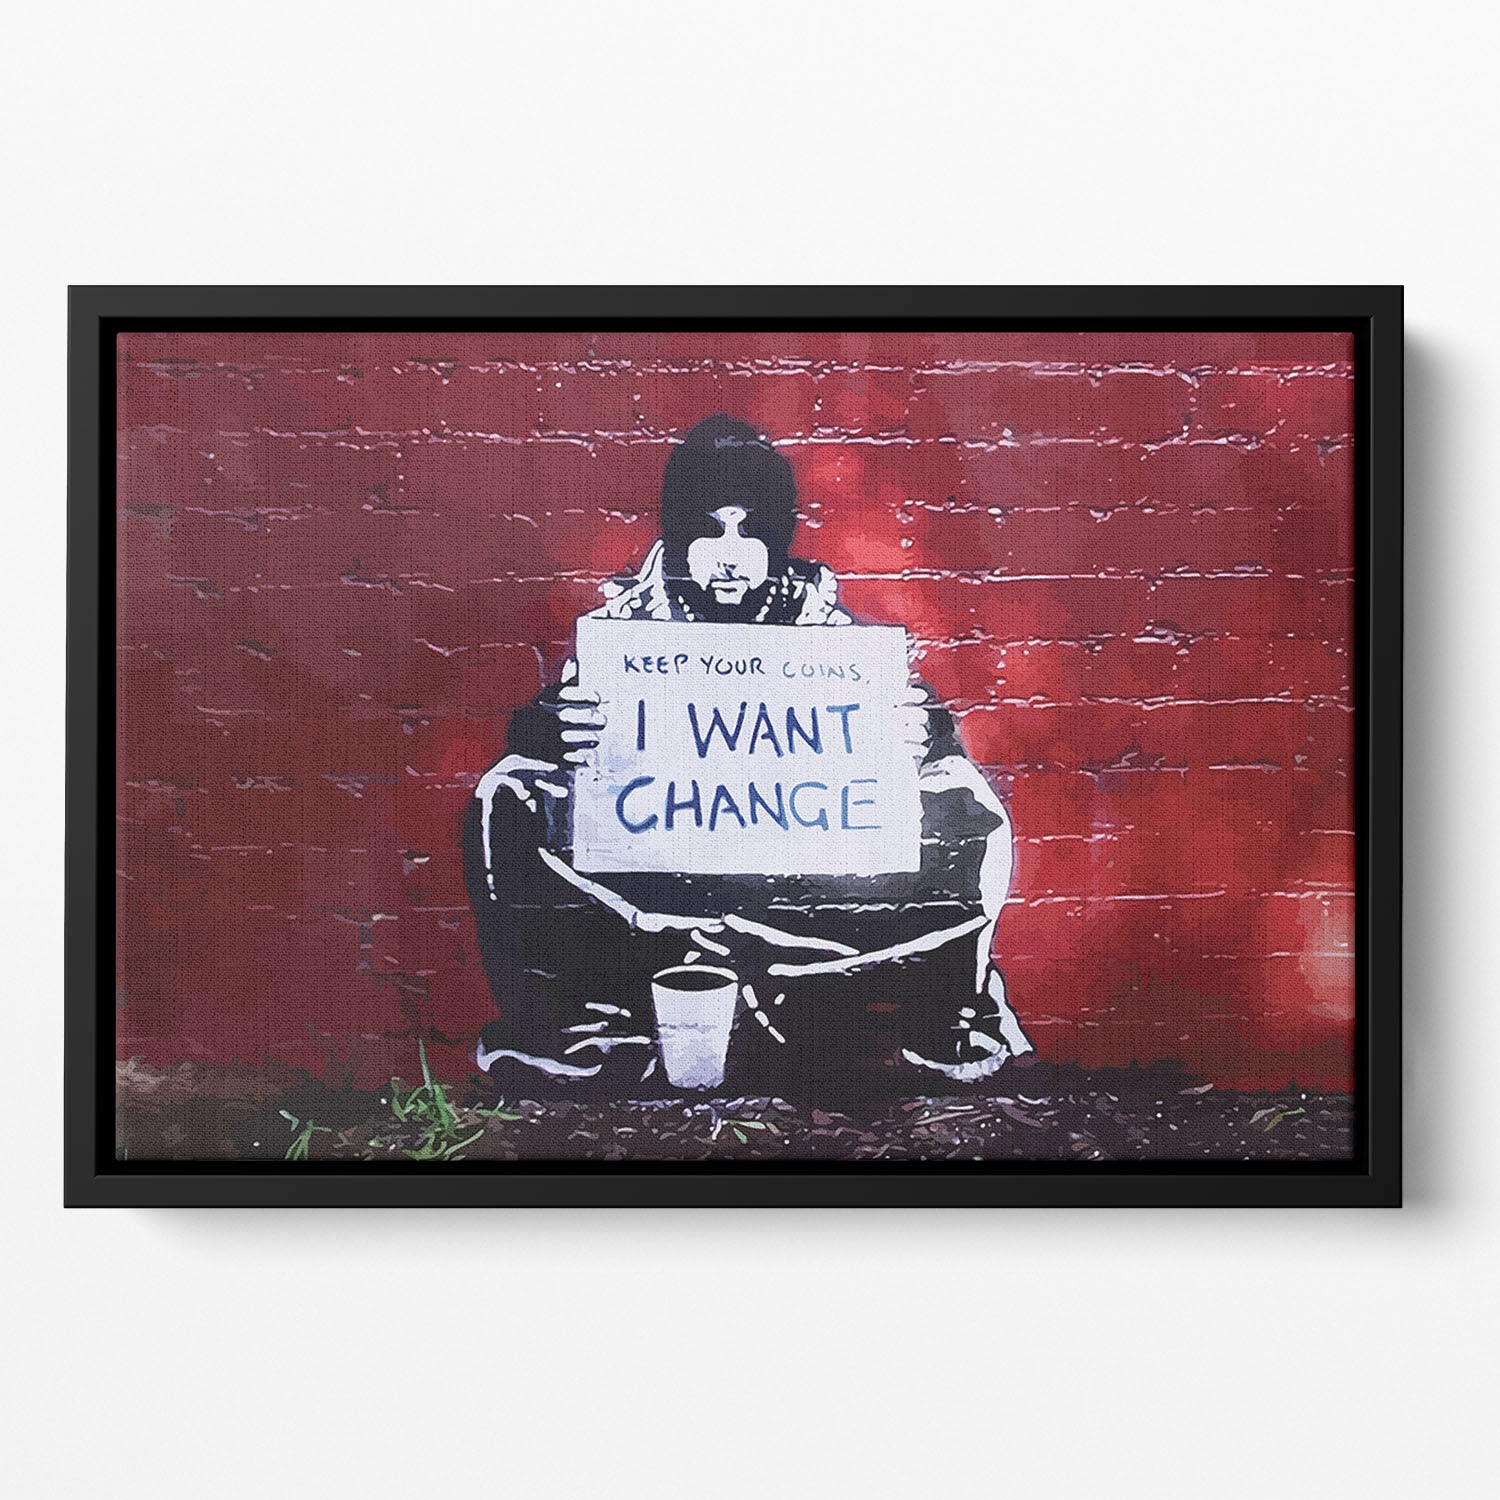 Banksy Keep Your Coins Floating Framed Canvas